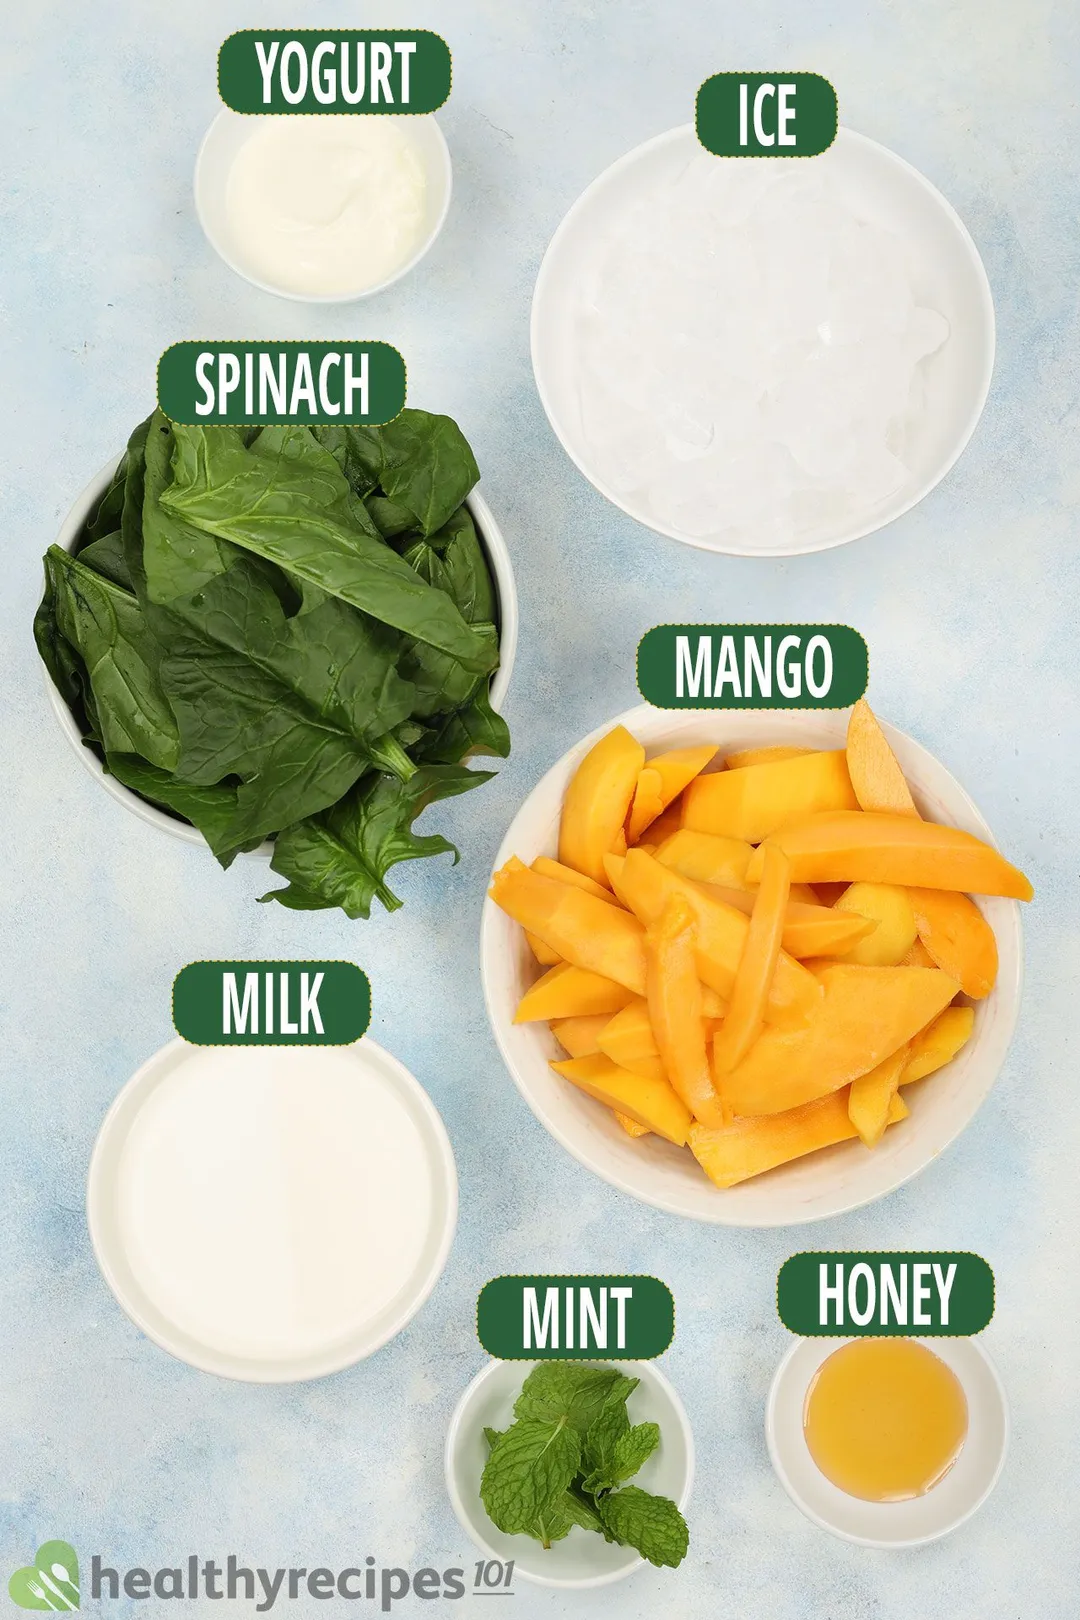 Ingredients for Mango Spinach Smoothie, including fresh spinach, mango wedges, mint leaves, and others.